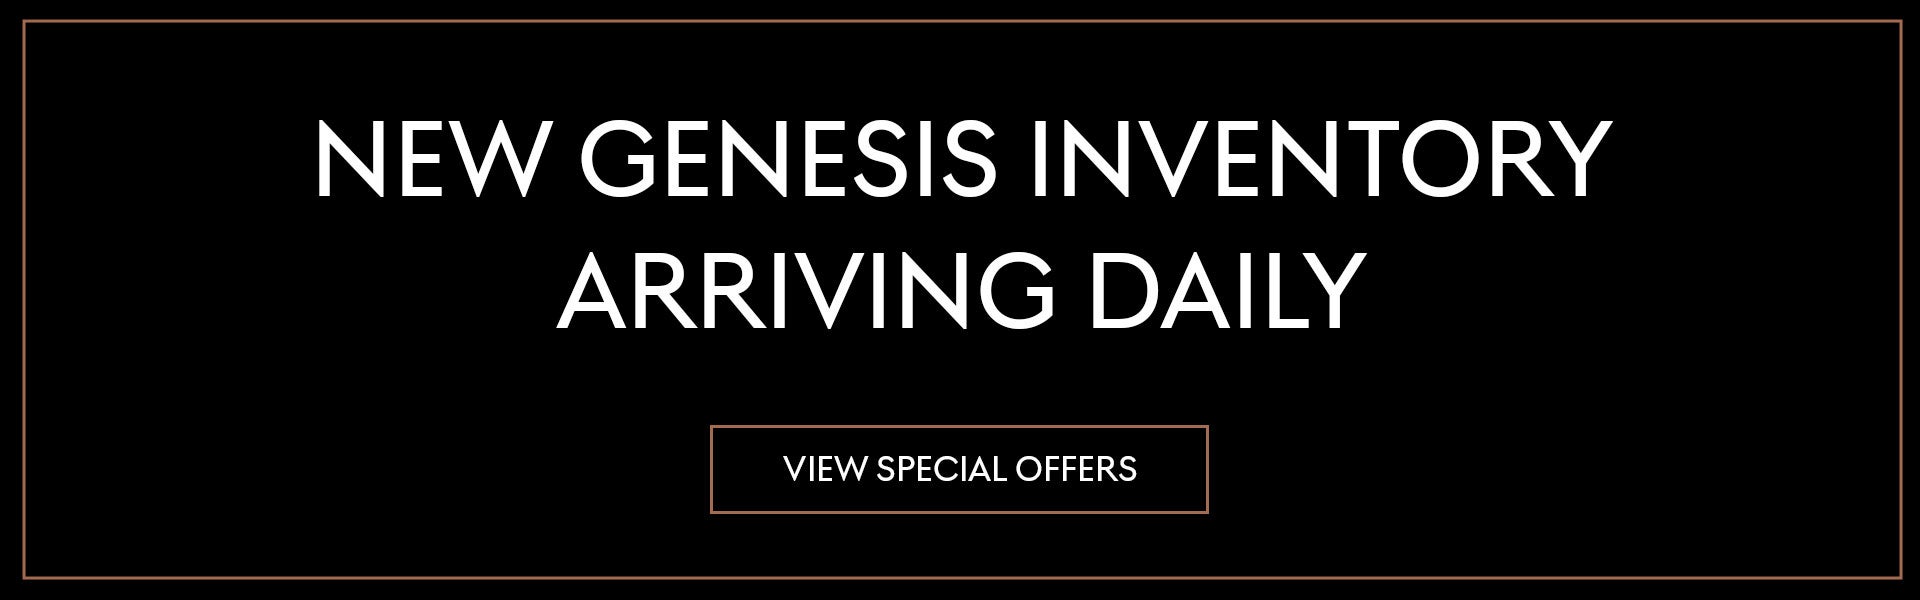 New Genesis Inventory Arriving Daily - View Special Offers